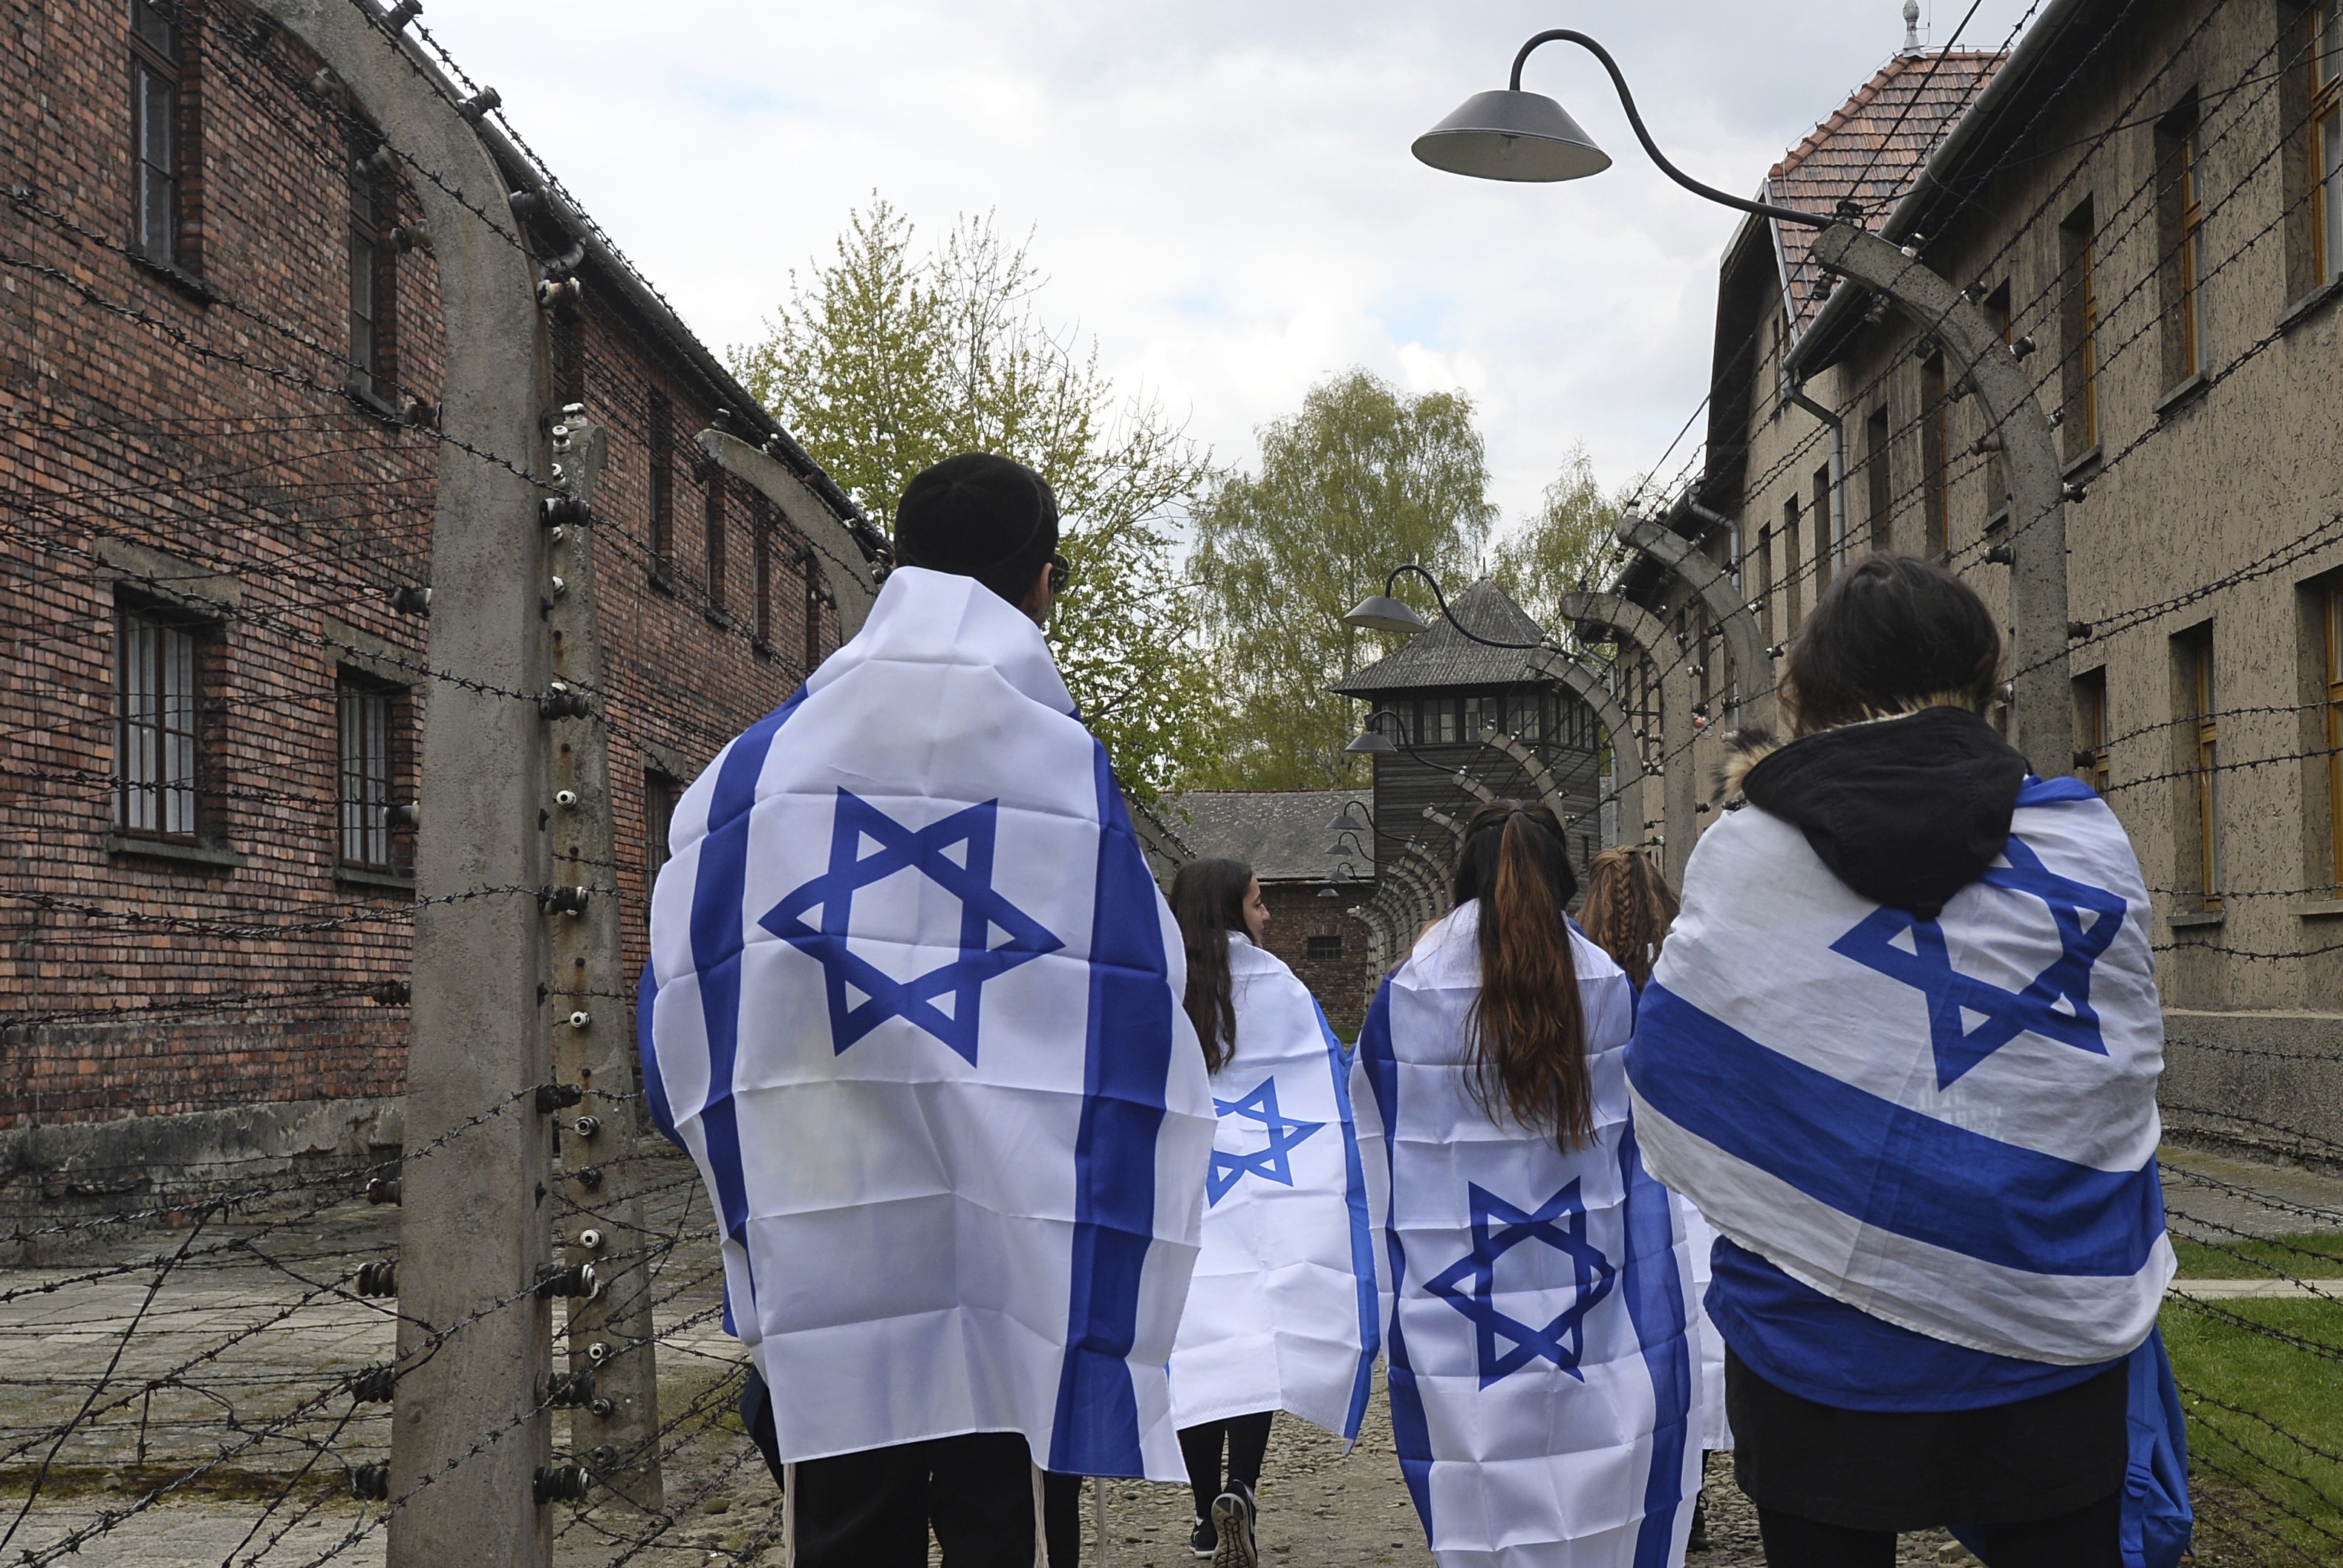 Participants in the yearly March of the Living walk between barbed wire fences in the former Nazi death camp of Auschwitz-Birkenau in Poland, on April 24, 2017. Jews from Israel and around the world marched the route from Auschwitz to Birkenau to commemorate Holocaust victims. A law recently passed by the Polish legislature would make it a crime to refer to such camps as “Polish”. Photo: AP